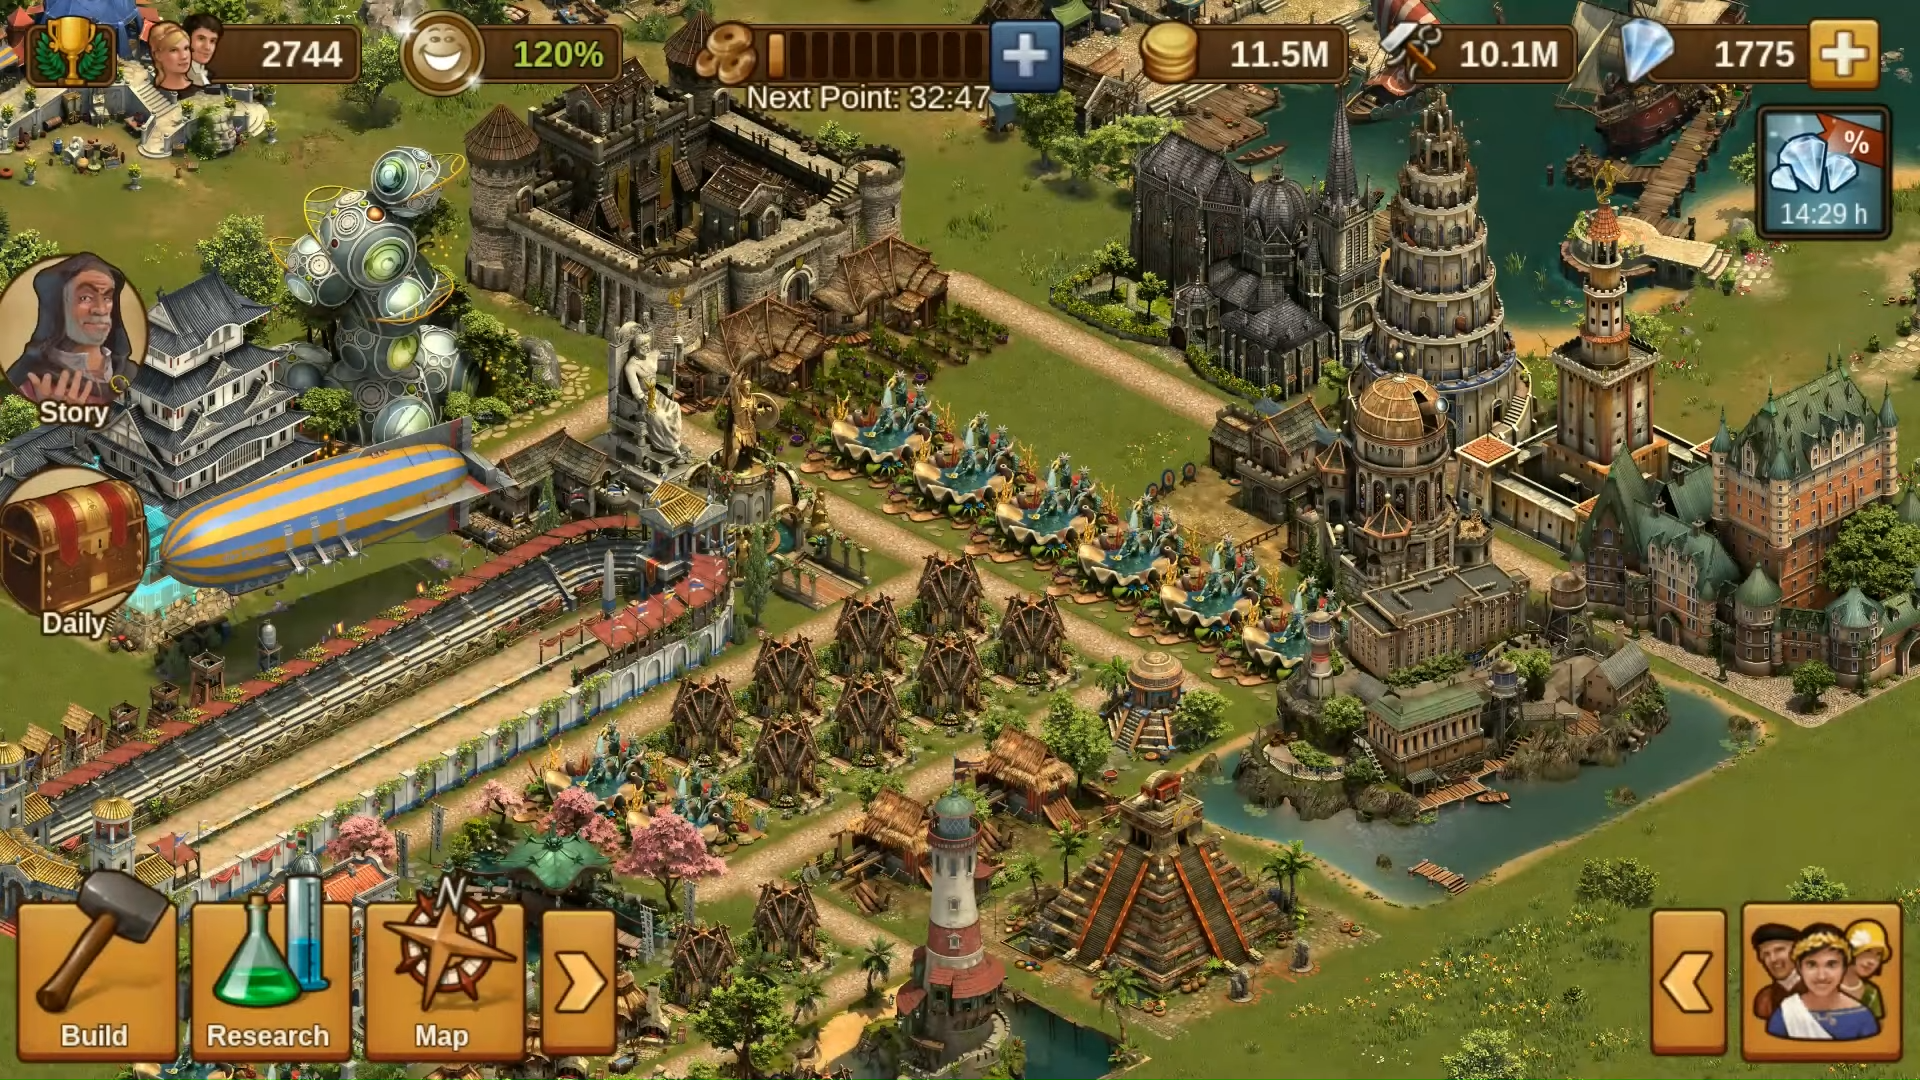 Best iPhone games: Forge of Empires. Image shows a historic kingdom from an isometric view.